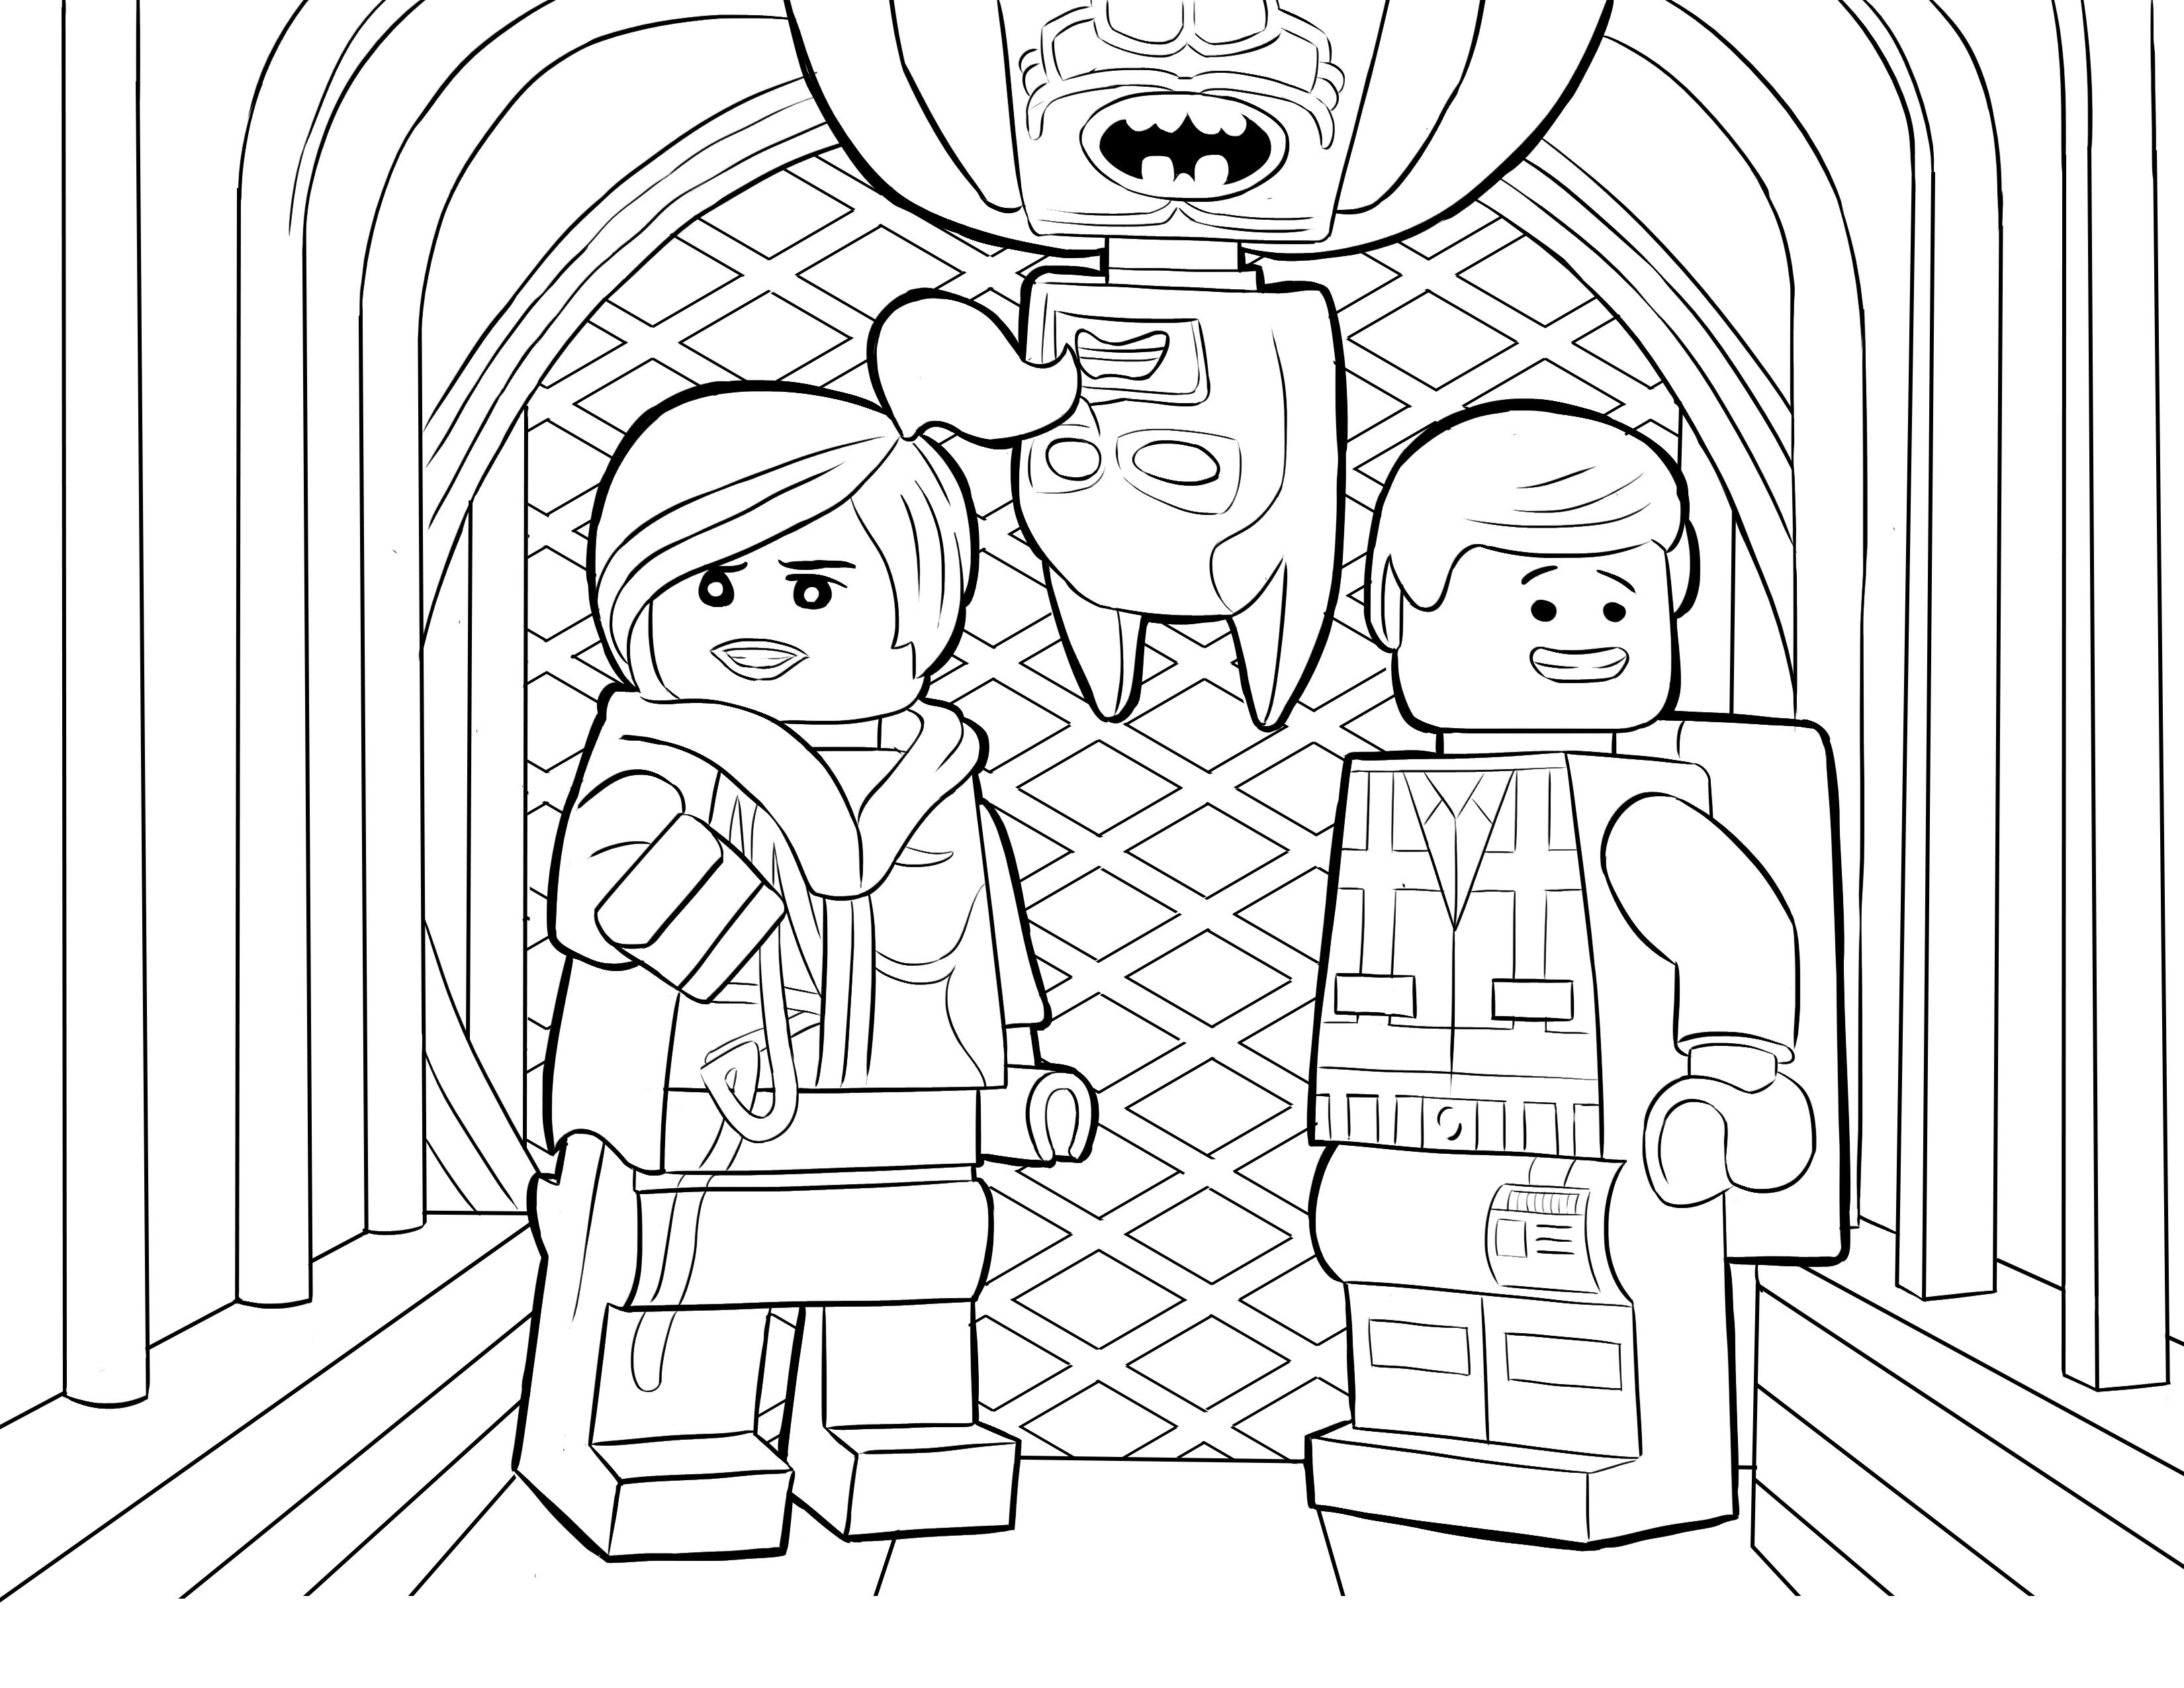 Coloring Sheets For Boys Lego
 lego coloring pages 07